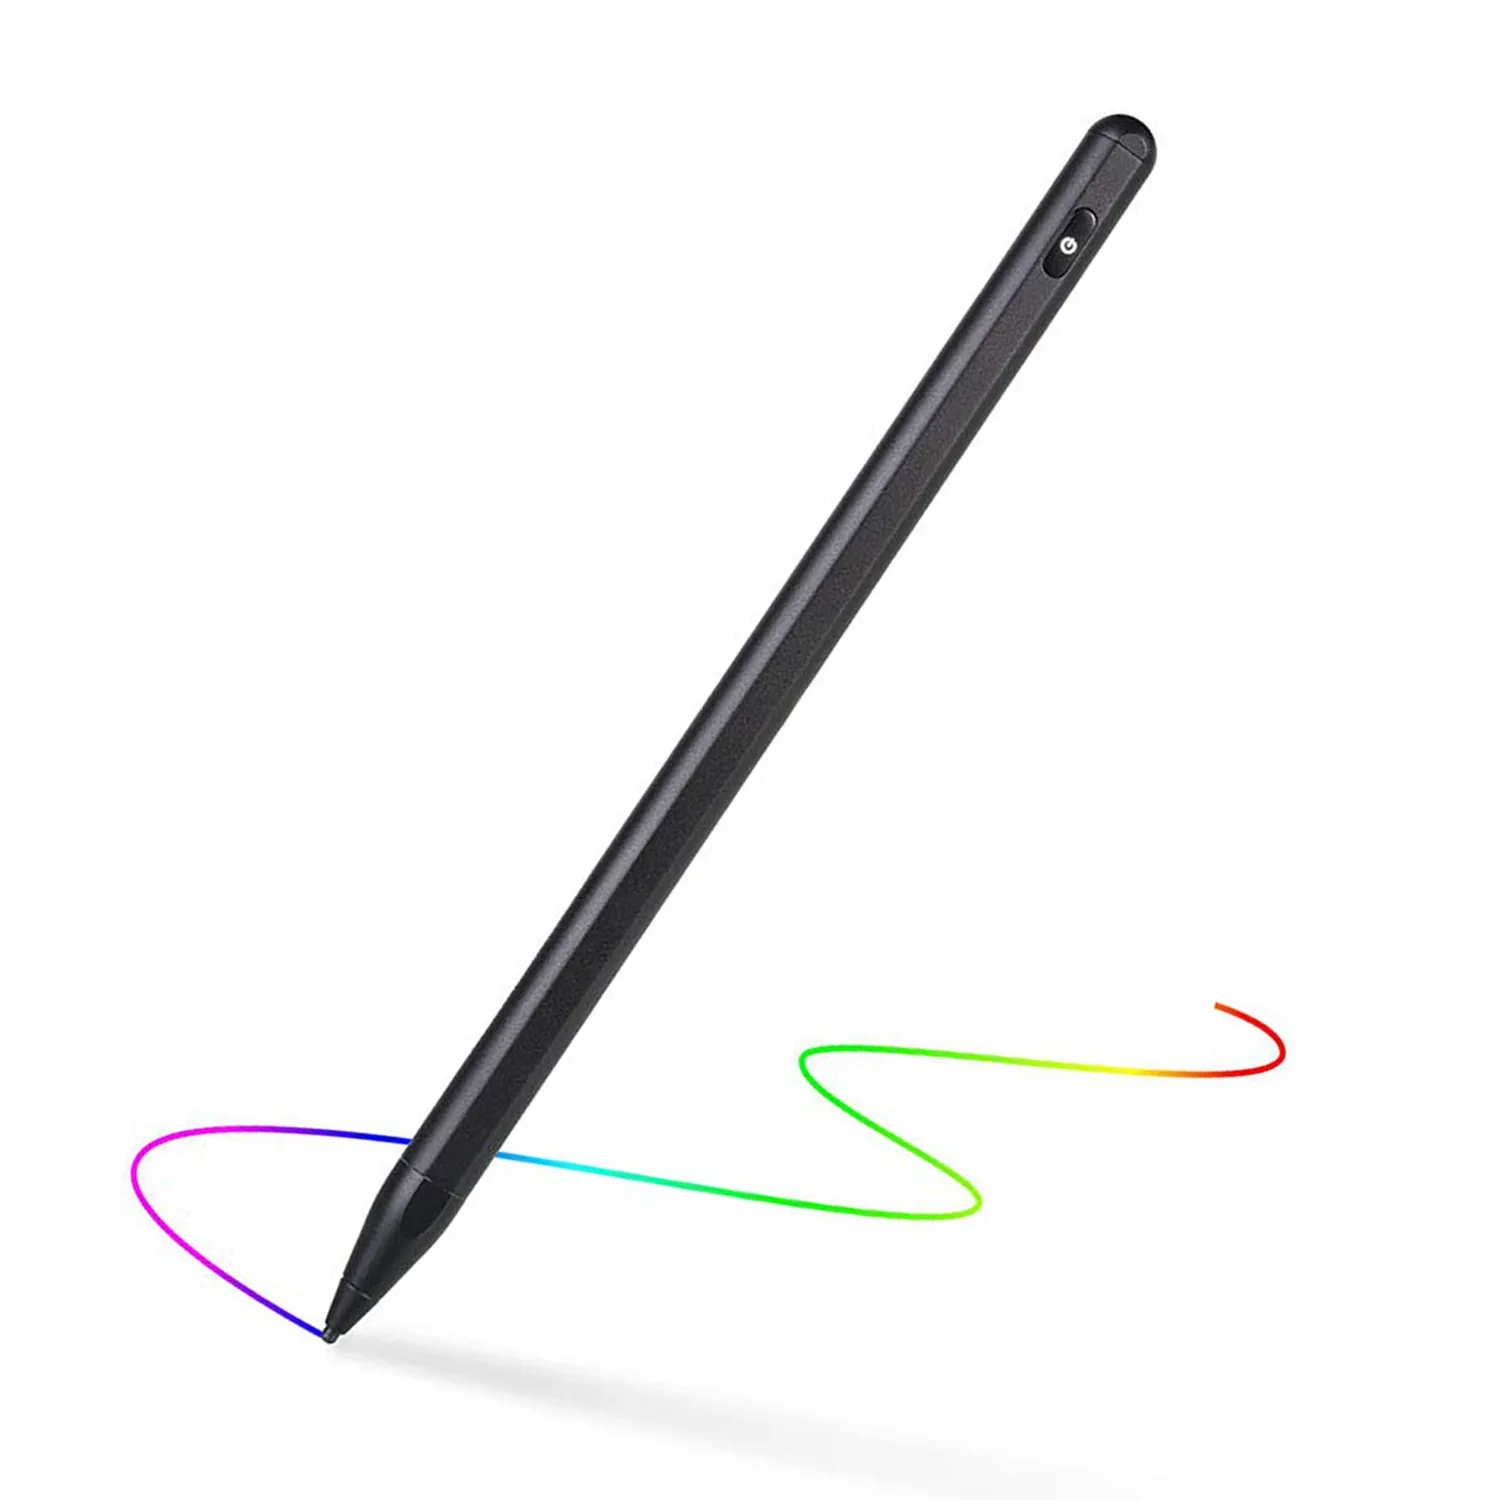 new 2019 trending product Active Capacitive Stylus Pen For iPad Pro Pencil For Samsung Mobile Phone Tablet Drawing Pen